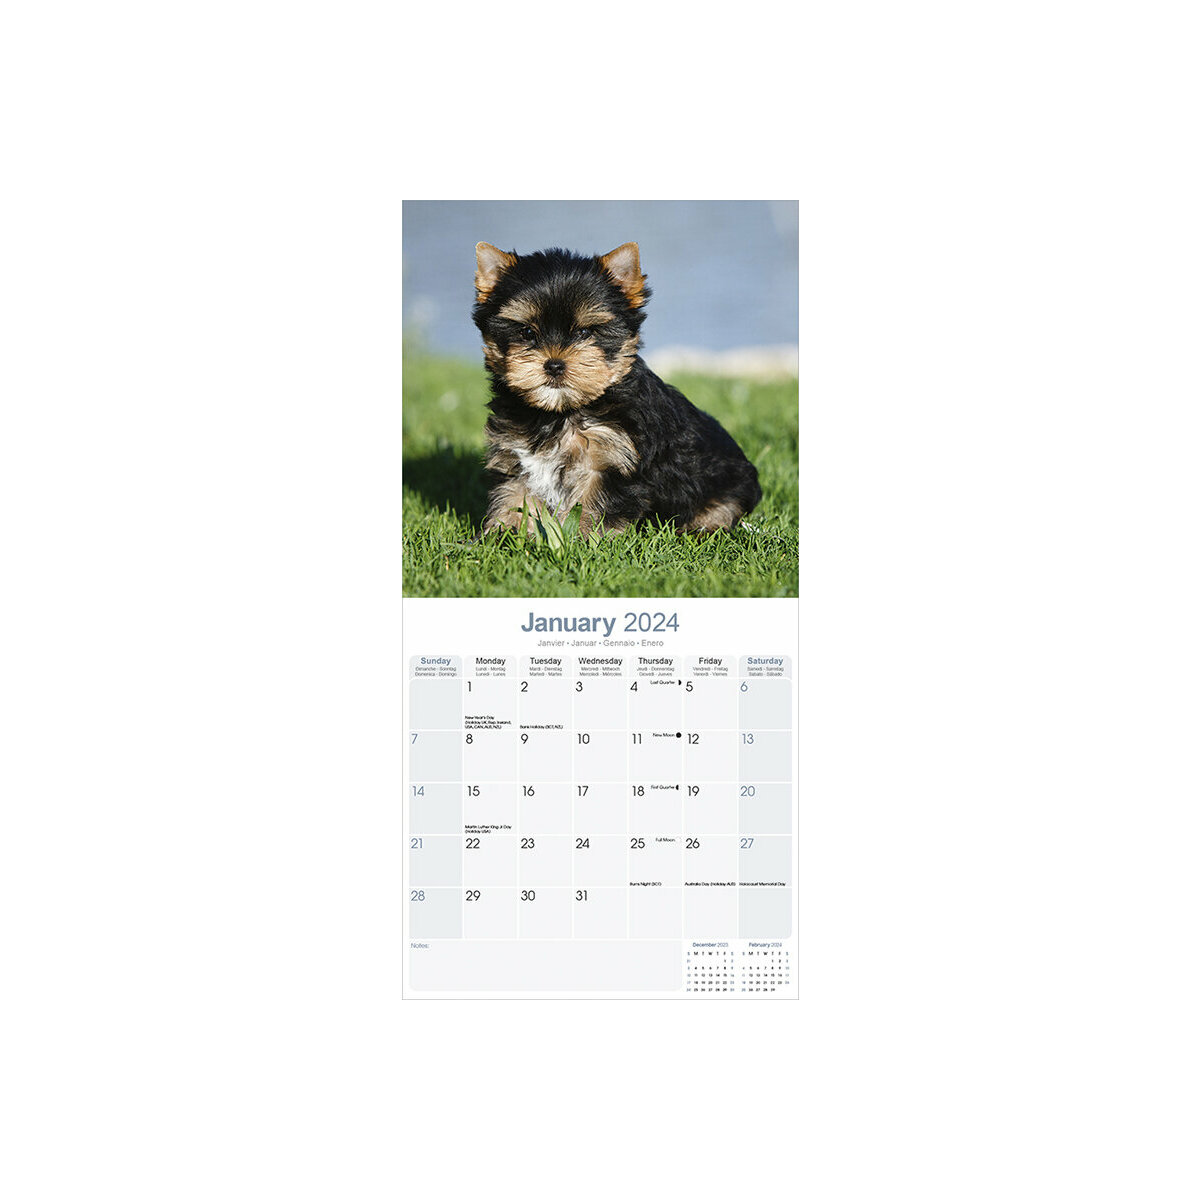 calendrier Yorkshire terrier chiot 2024